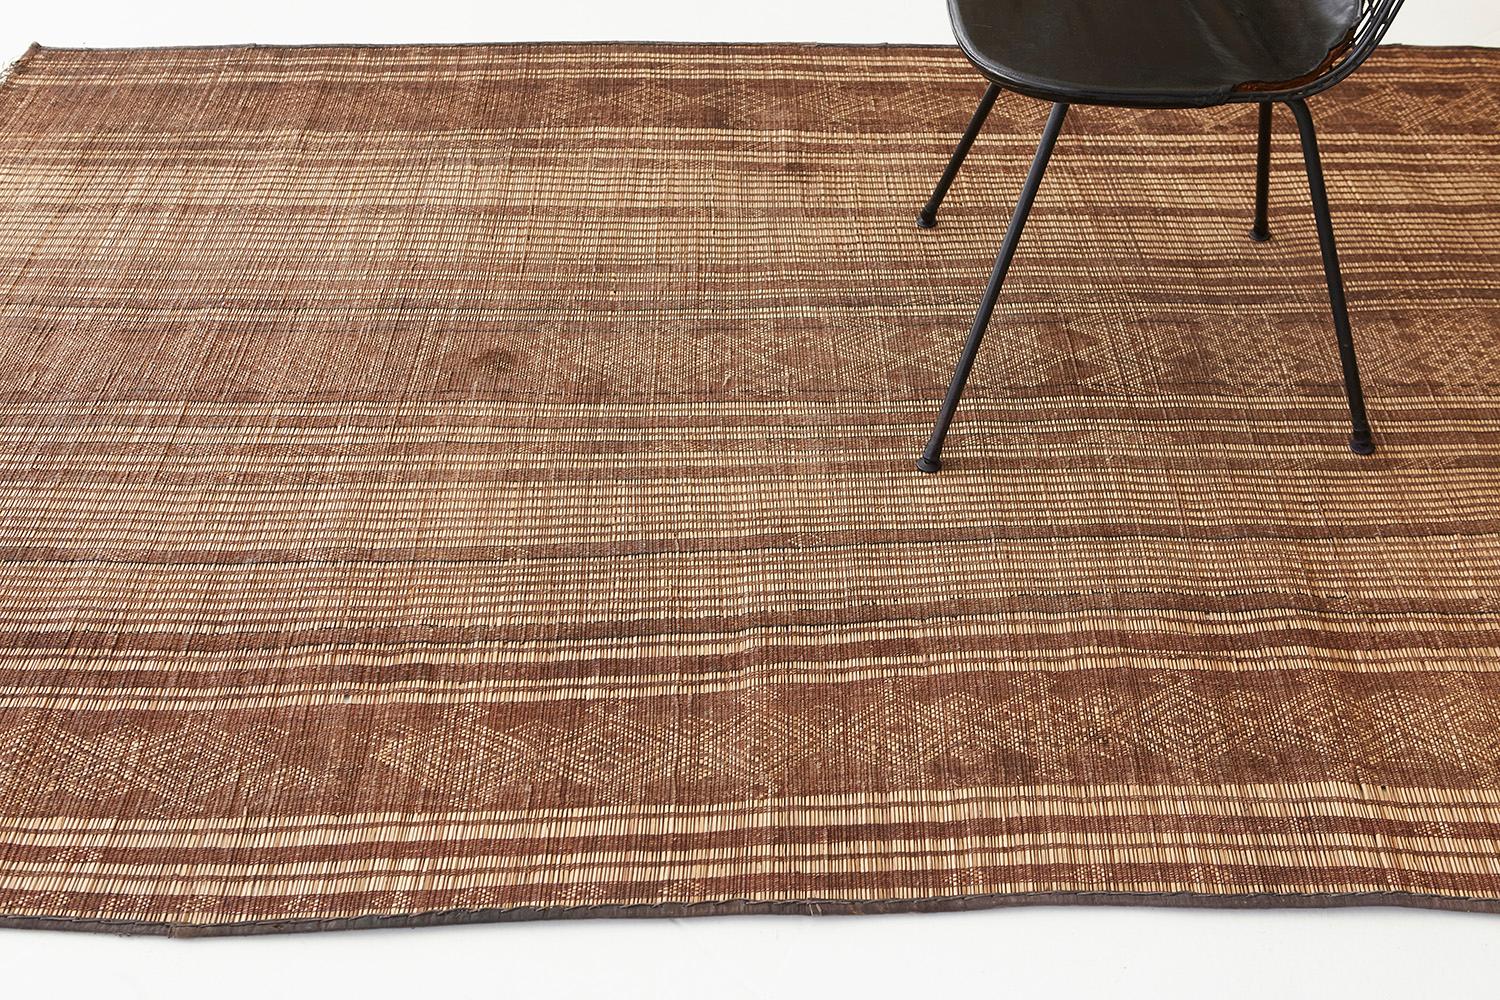 Embellish your room with history and sophistication with our Tuareg mat. It highlights the linear patterns and ambiguous Berber symbols on its core which are open to interpretation. Known for their durability, these are made from reed and camel